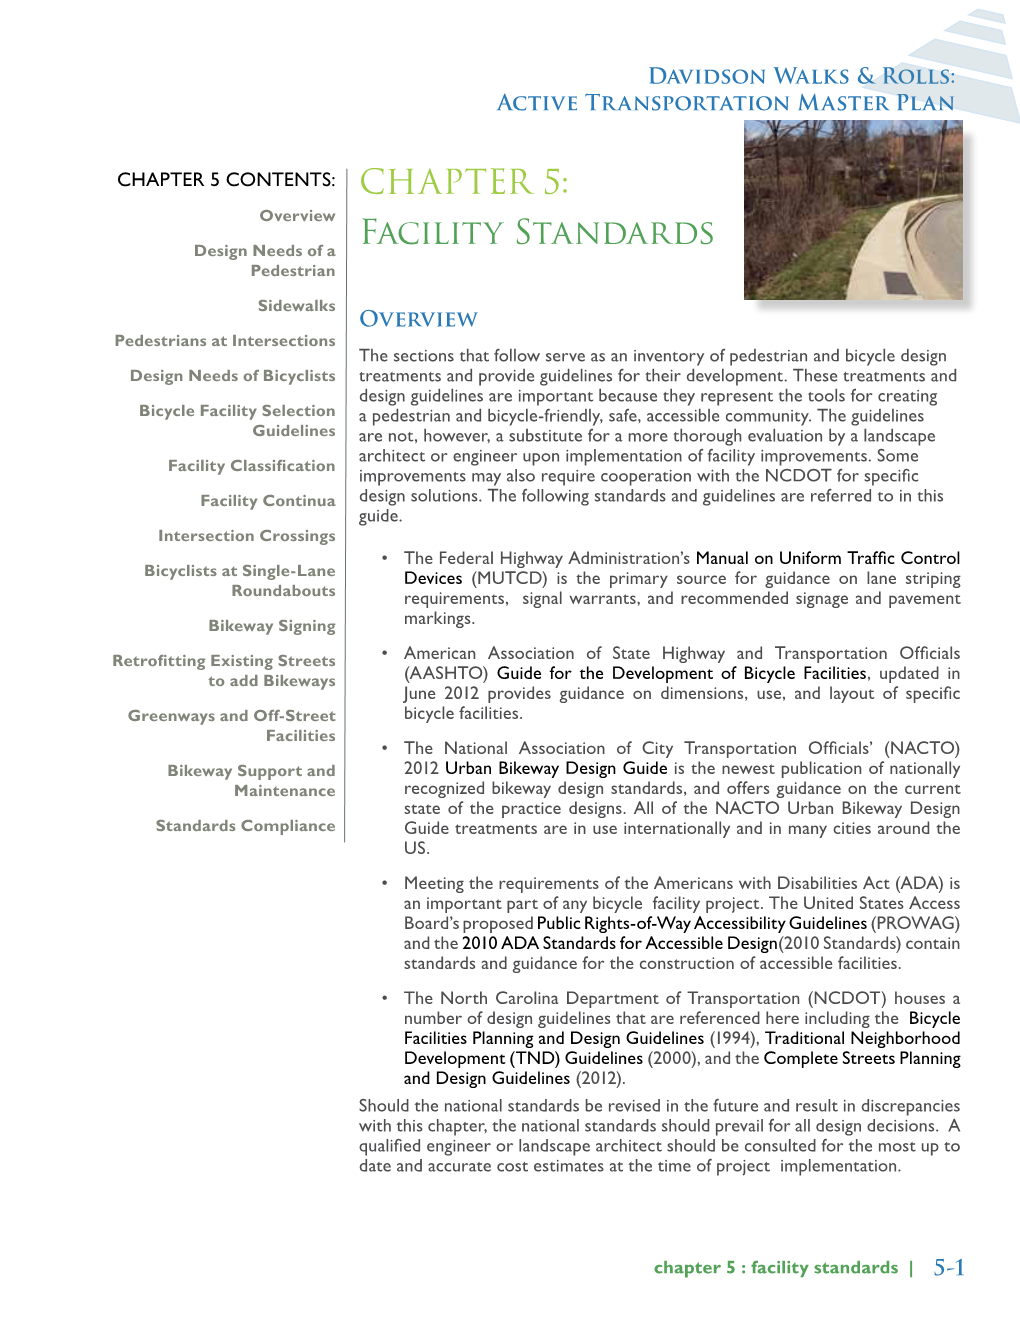 CHAPTER 5: Facility Standards